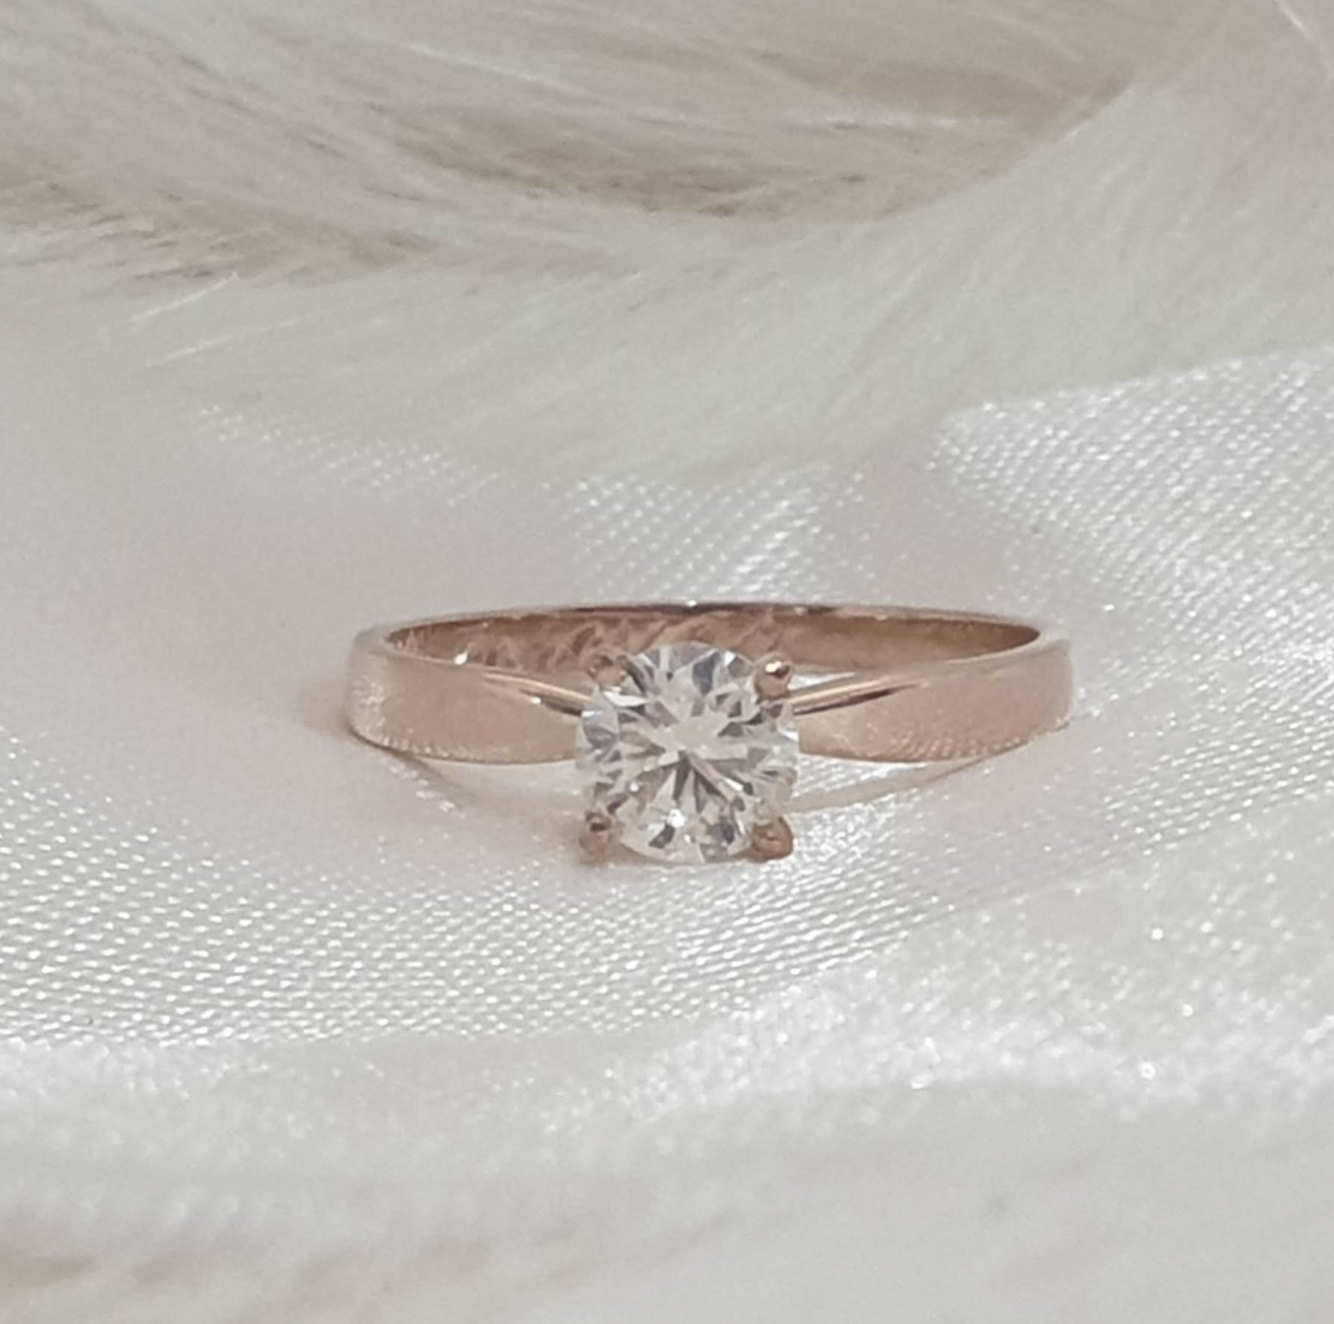 Aaron solitaire engagement ring